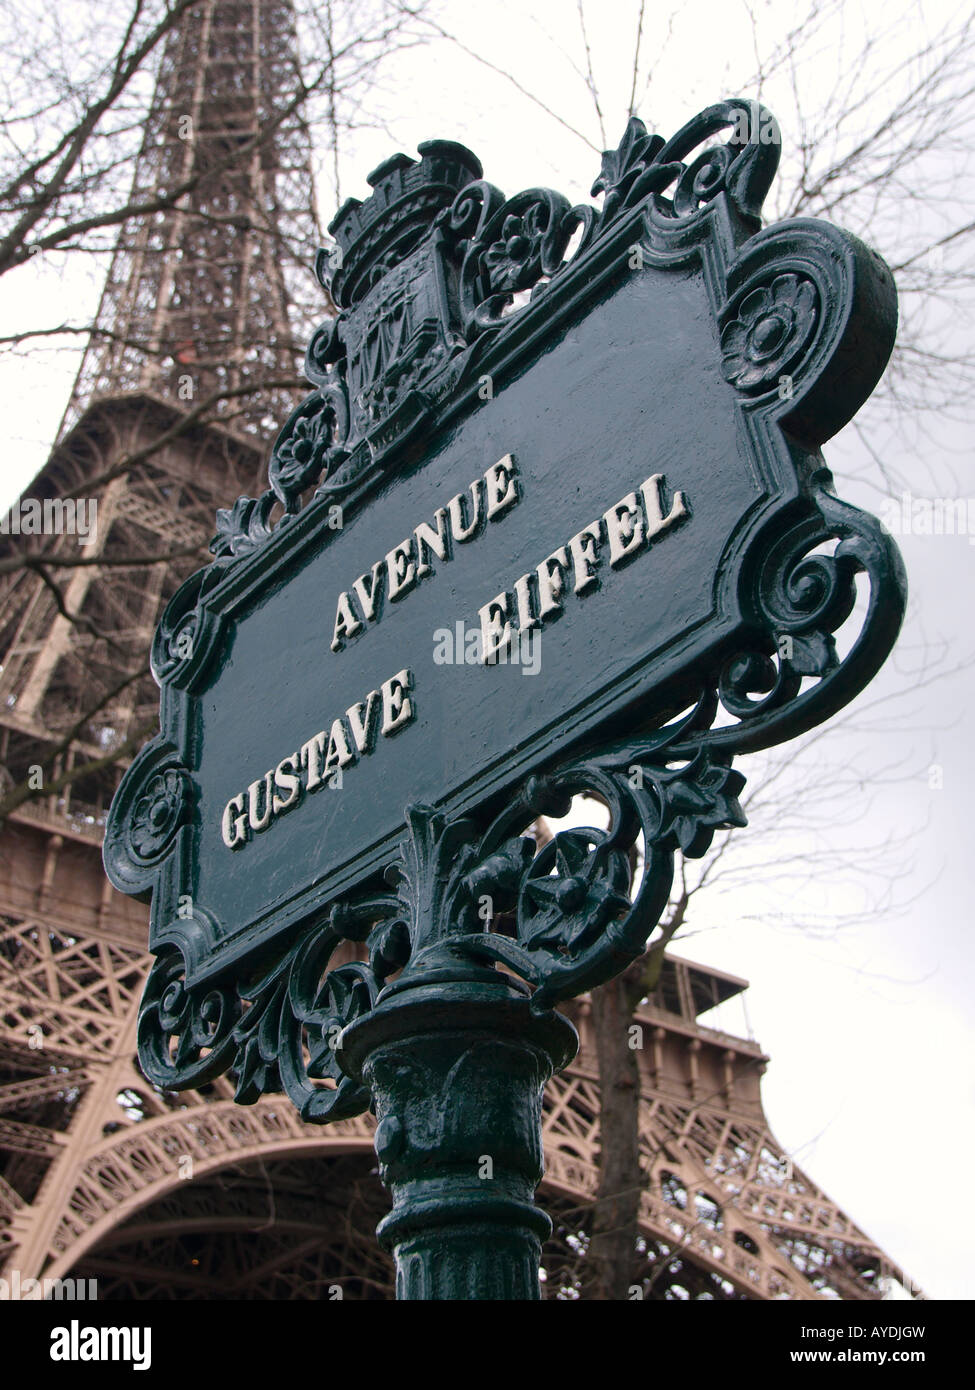 Avenue Gustave Eiffel street sign with the famous Eiffel tower in the background Paris France Stock Photo